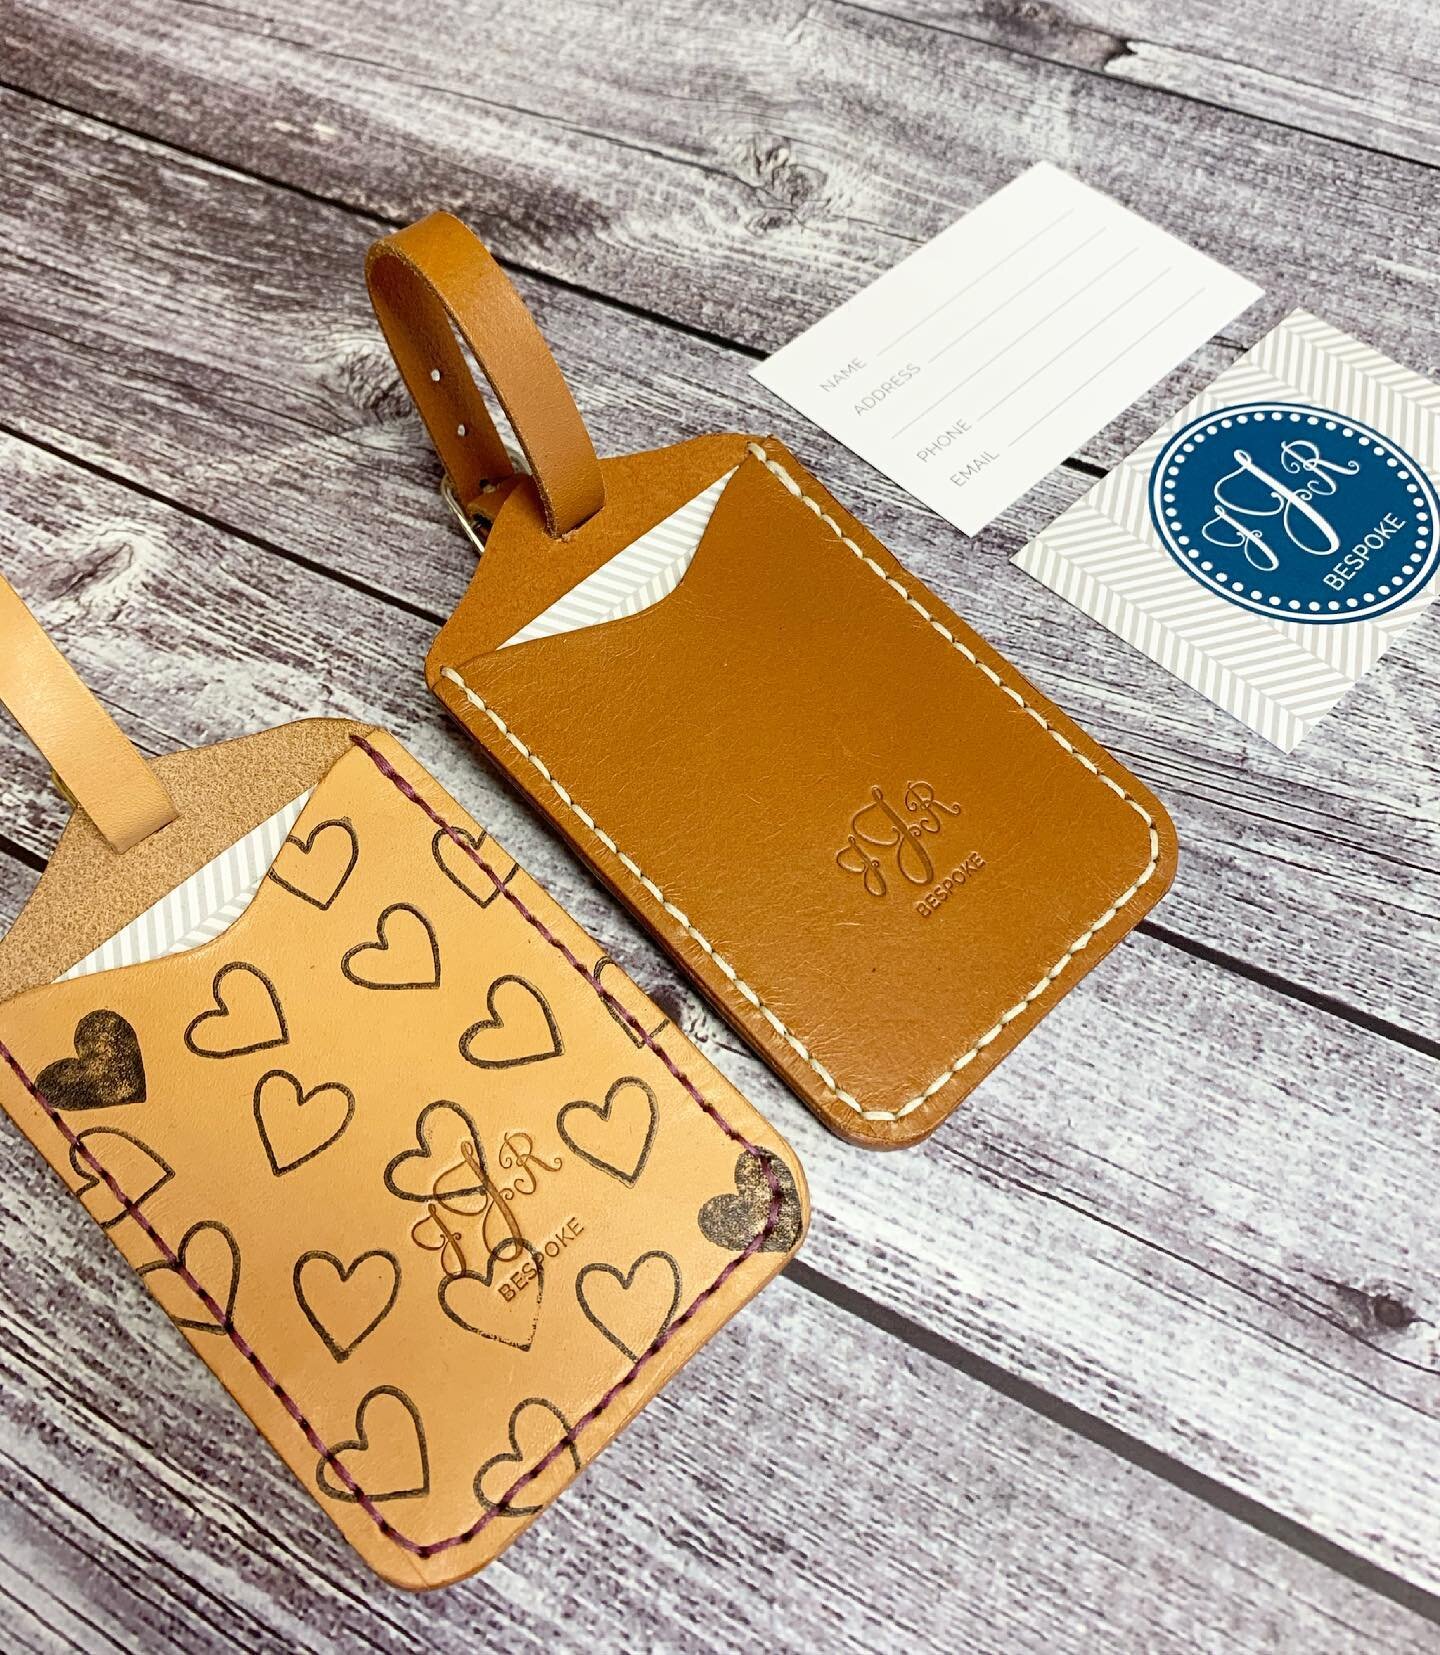 Guyssss! I have two luggage tags made up and ready to go on an adventure! 

1x natural veg tan leather with limited edition heart print with purple stitching and gold hardware.

1x Tan brown veg tan leather with cream stitching and silver hardware. 
